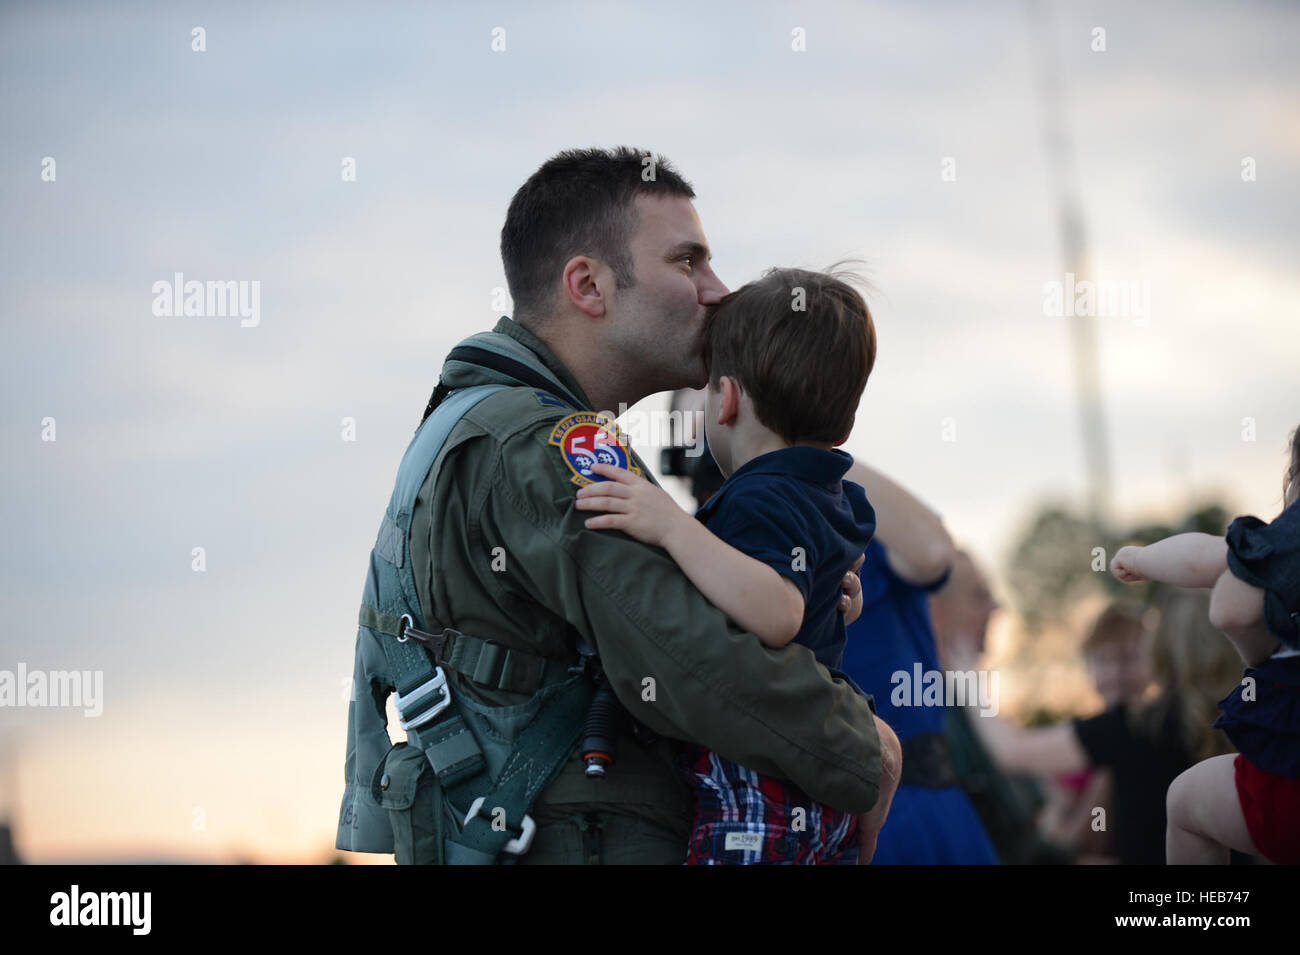 SHAW AIR FORCE BASE, S.C. – U.S. Air Force Capt. Robbie Sandwith, a F-16 pilot assigned to the 55th Fighter Squadron, Shaw Air Force Base kisses his son on the forehead upon returning home after a six-month deployment to Osan Air Base, Republic of Korea.  Master Sgt. Cohen A. Young Stock Photo